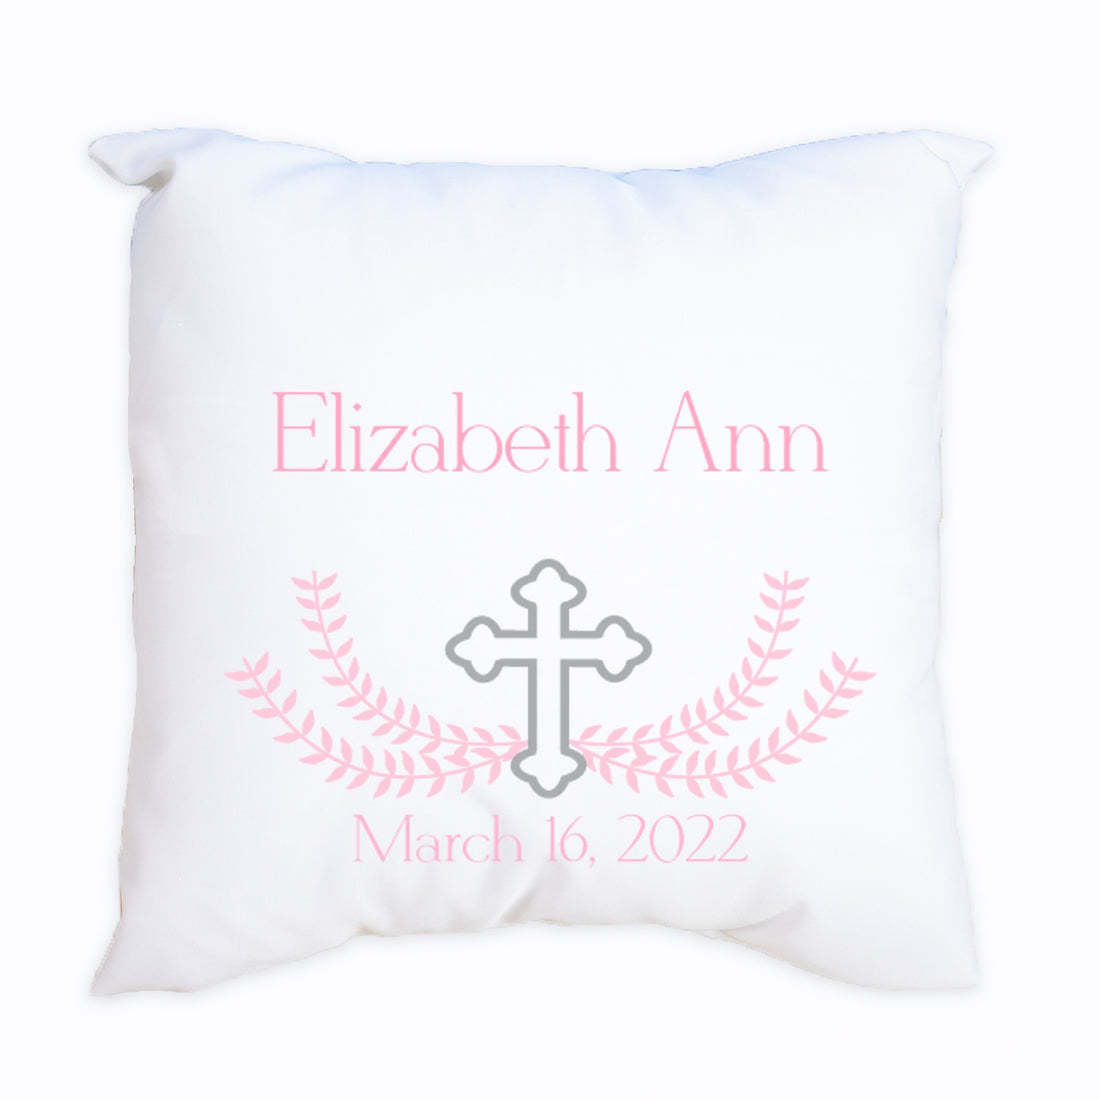 Personalized Throw Pillow - Pink Cross